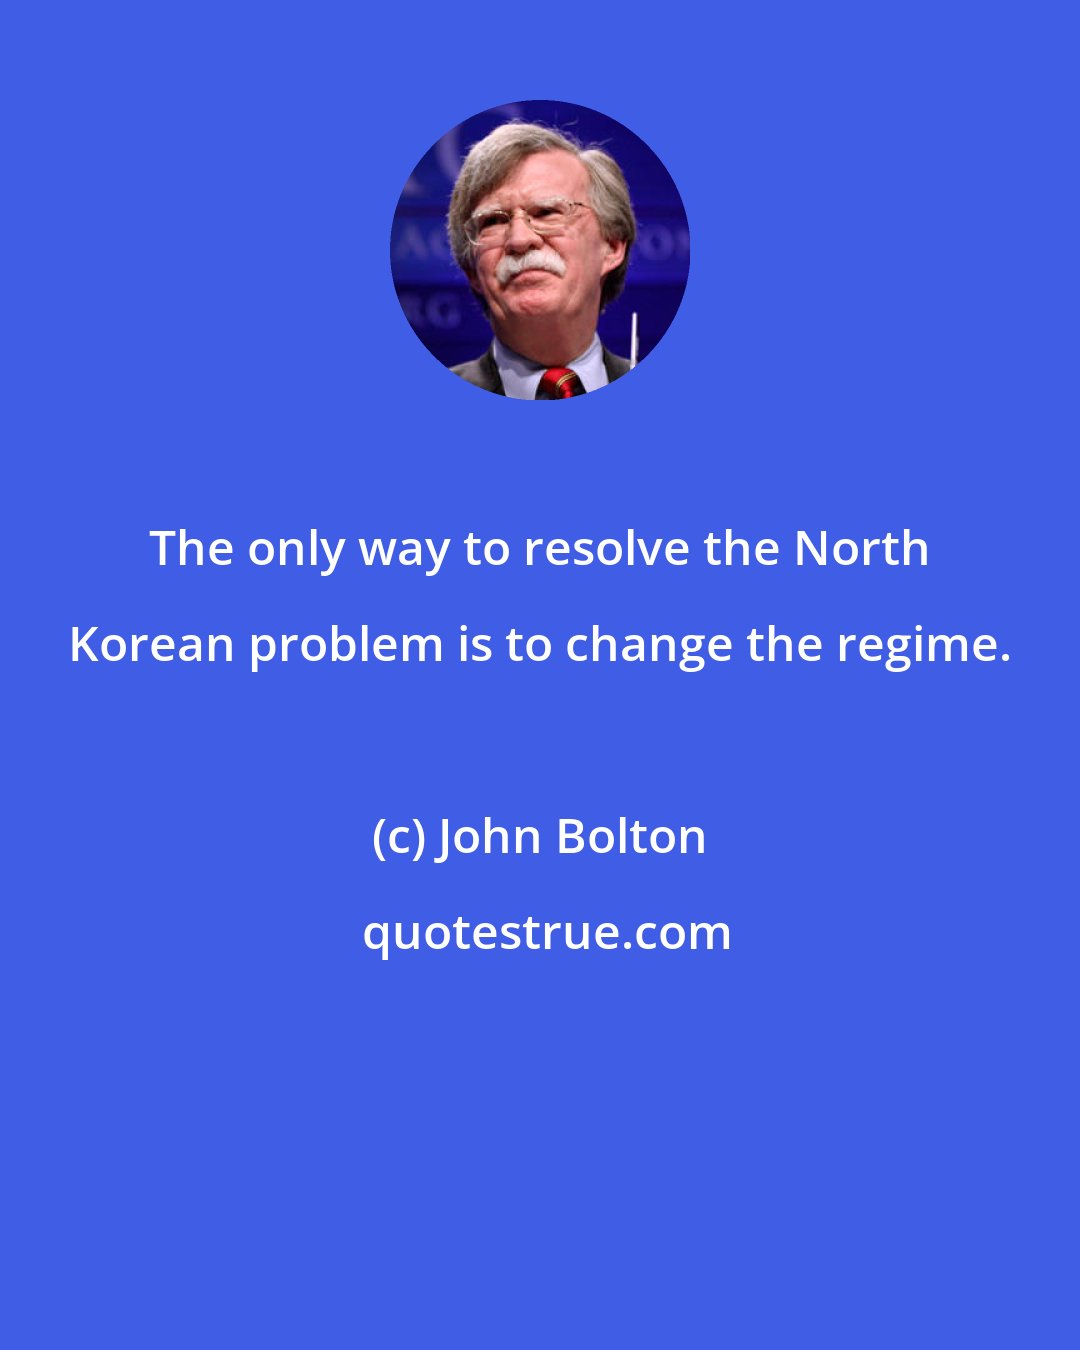 John Bolton: The only way to resolve the North Korean problem is to change the regime.